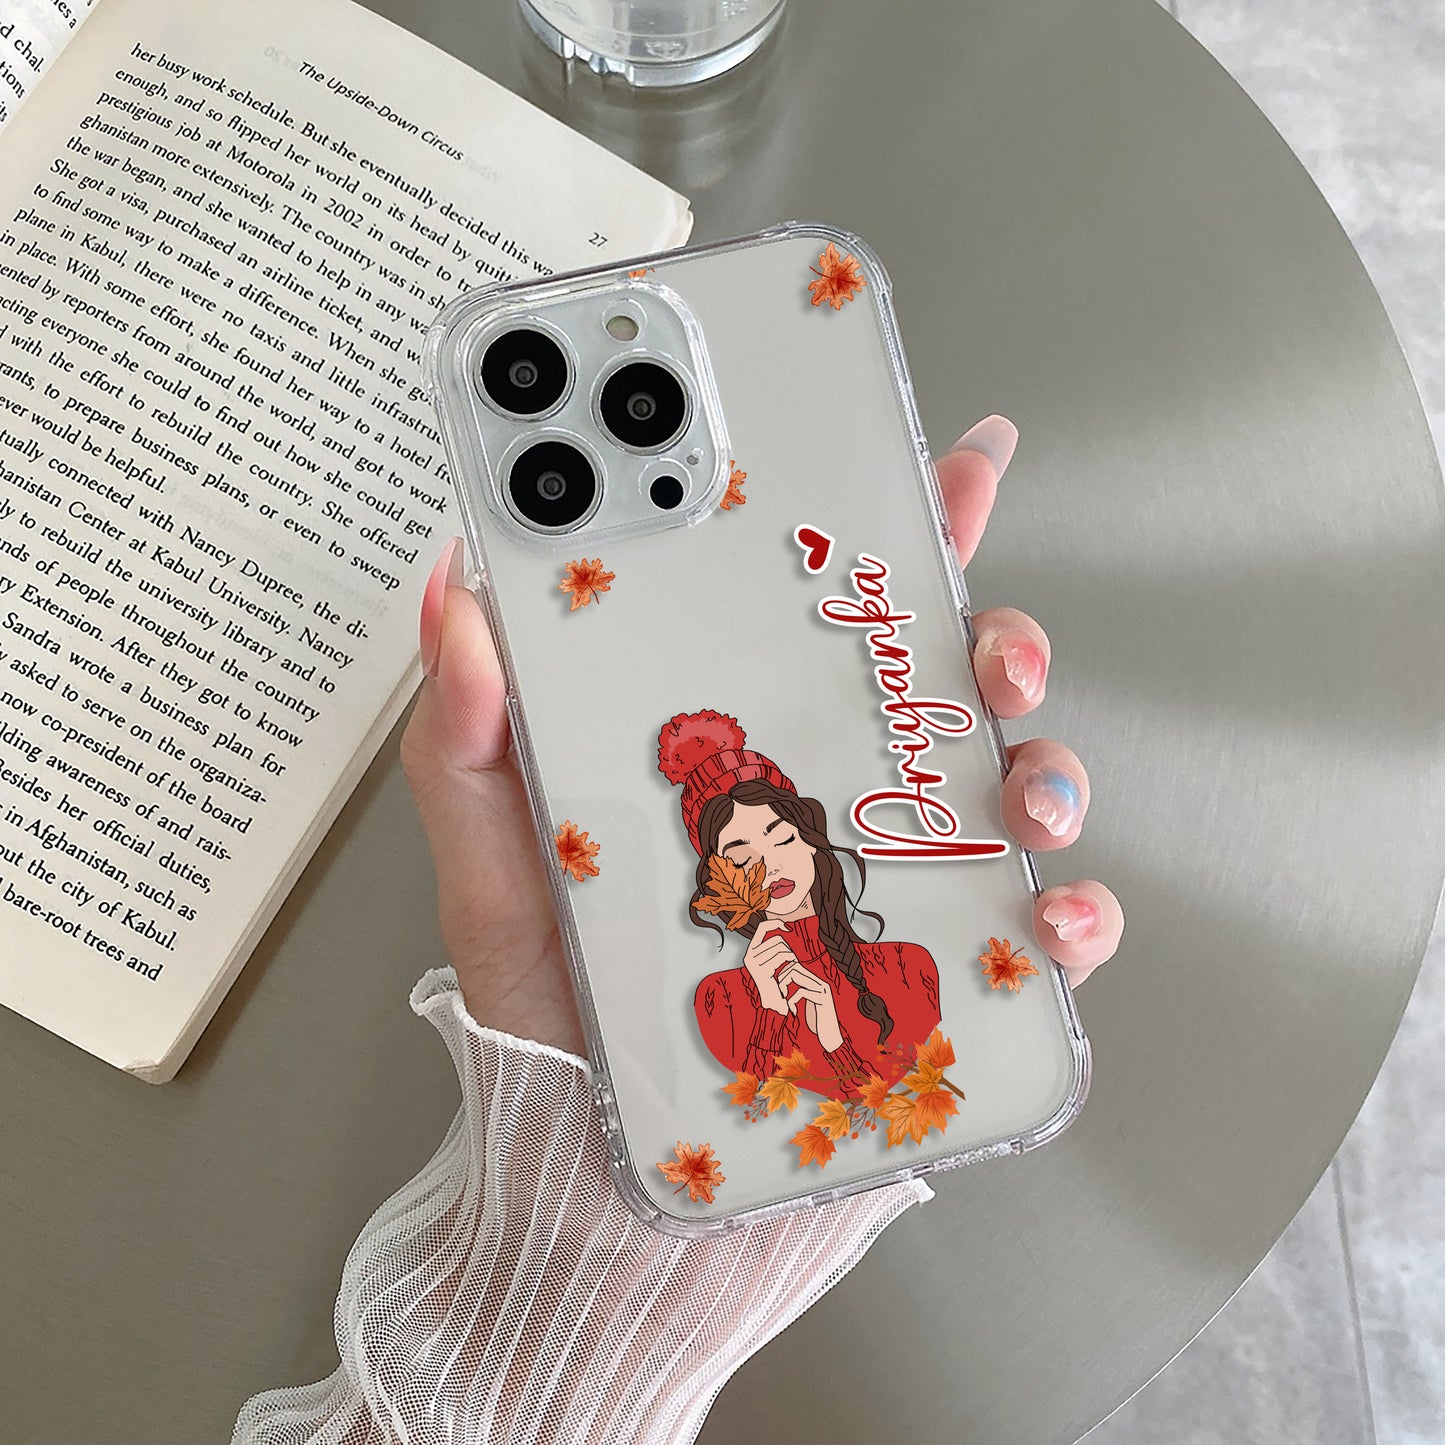 Daisy Flower Customize Transparent Silicon Case For iPhone